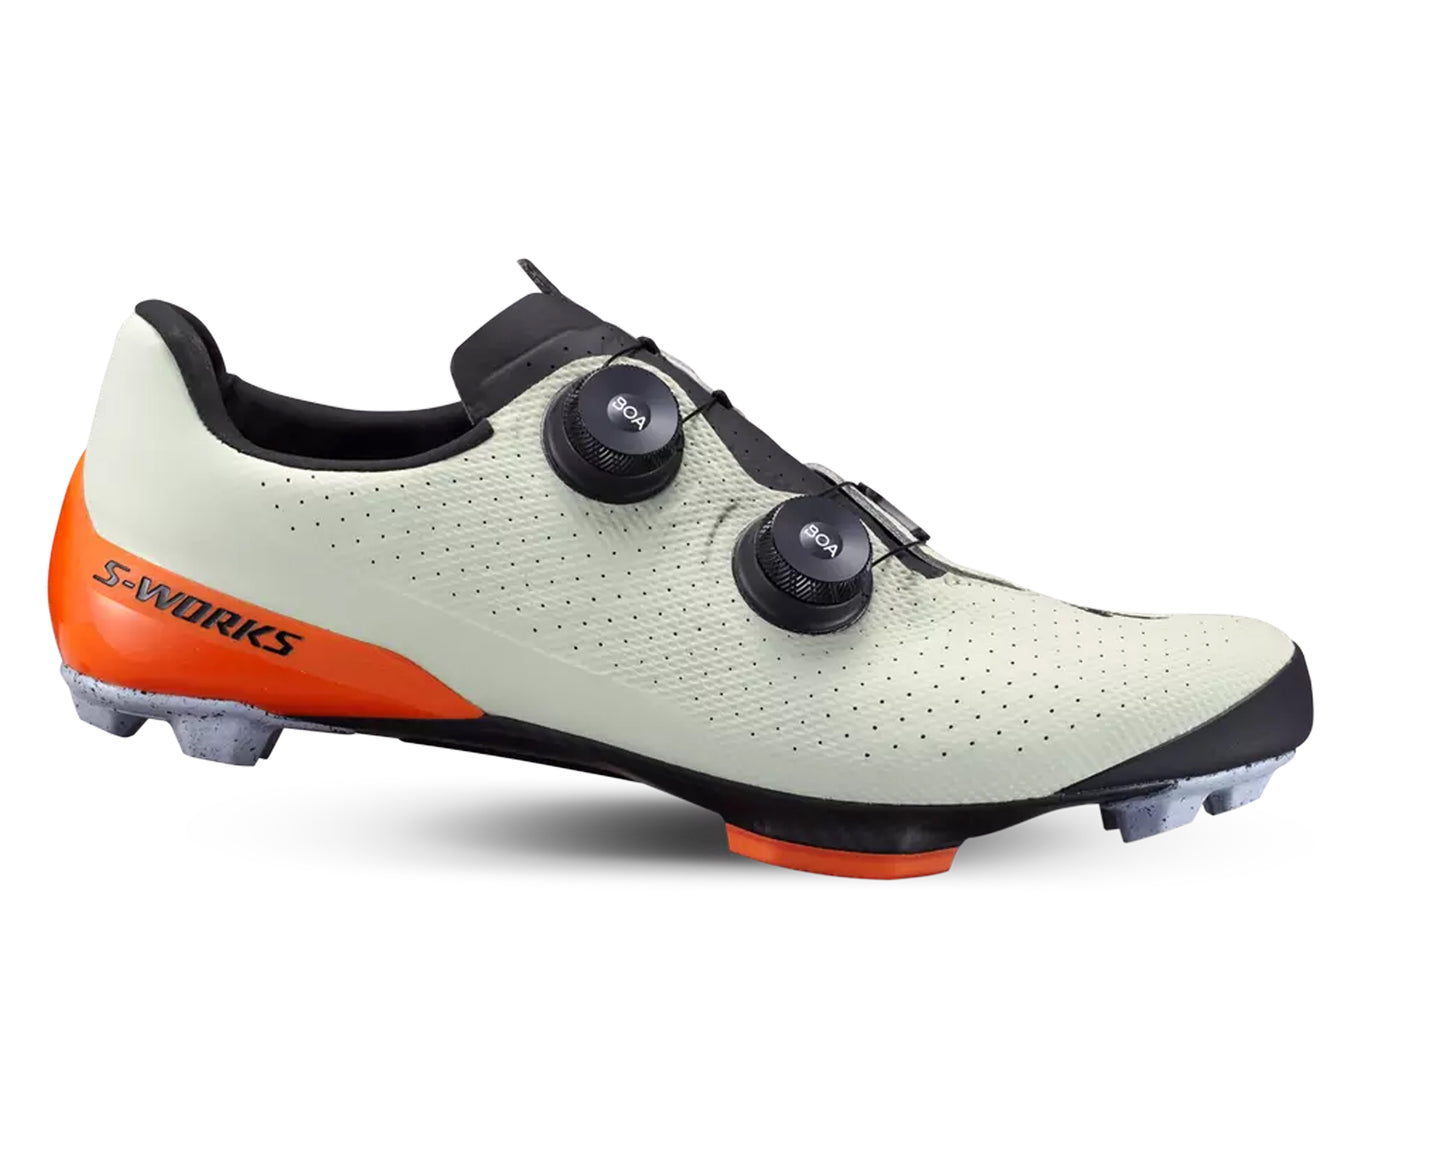 Specialized S-Works Recon MTB Shoe